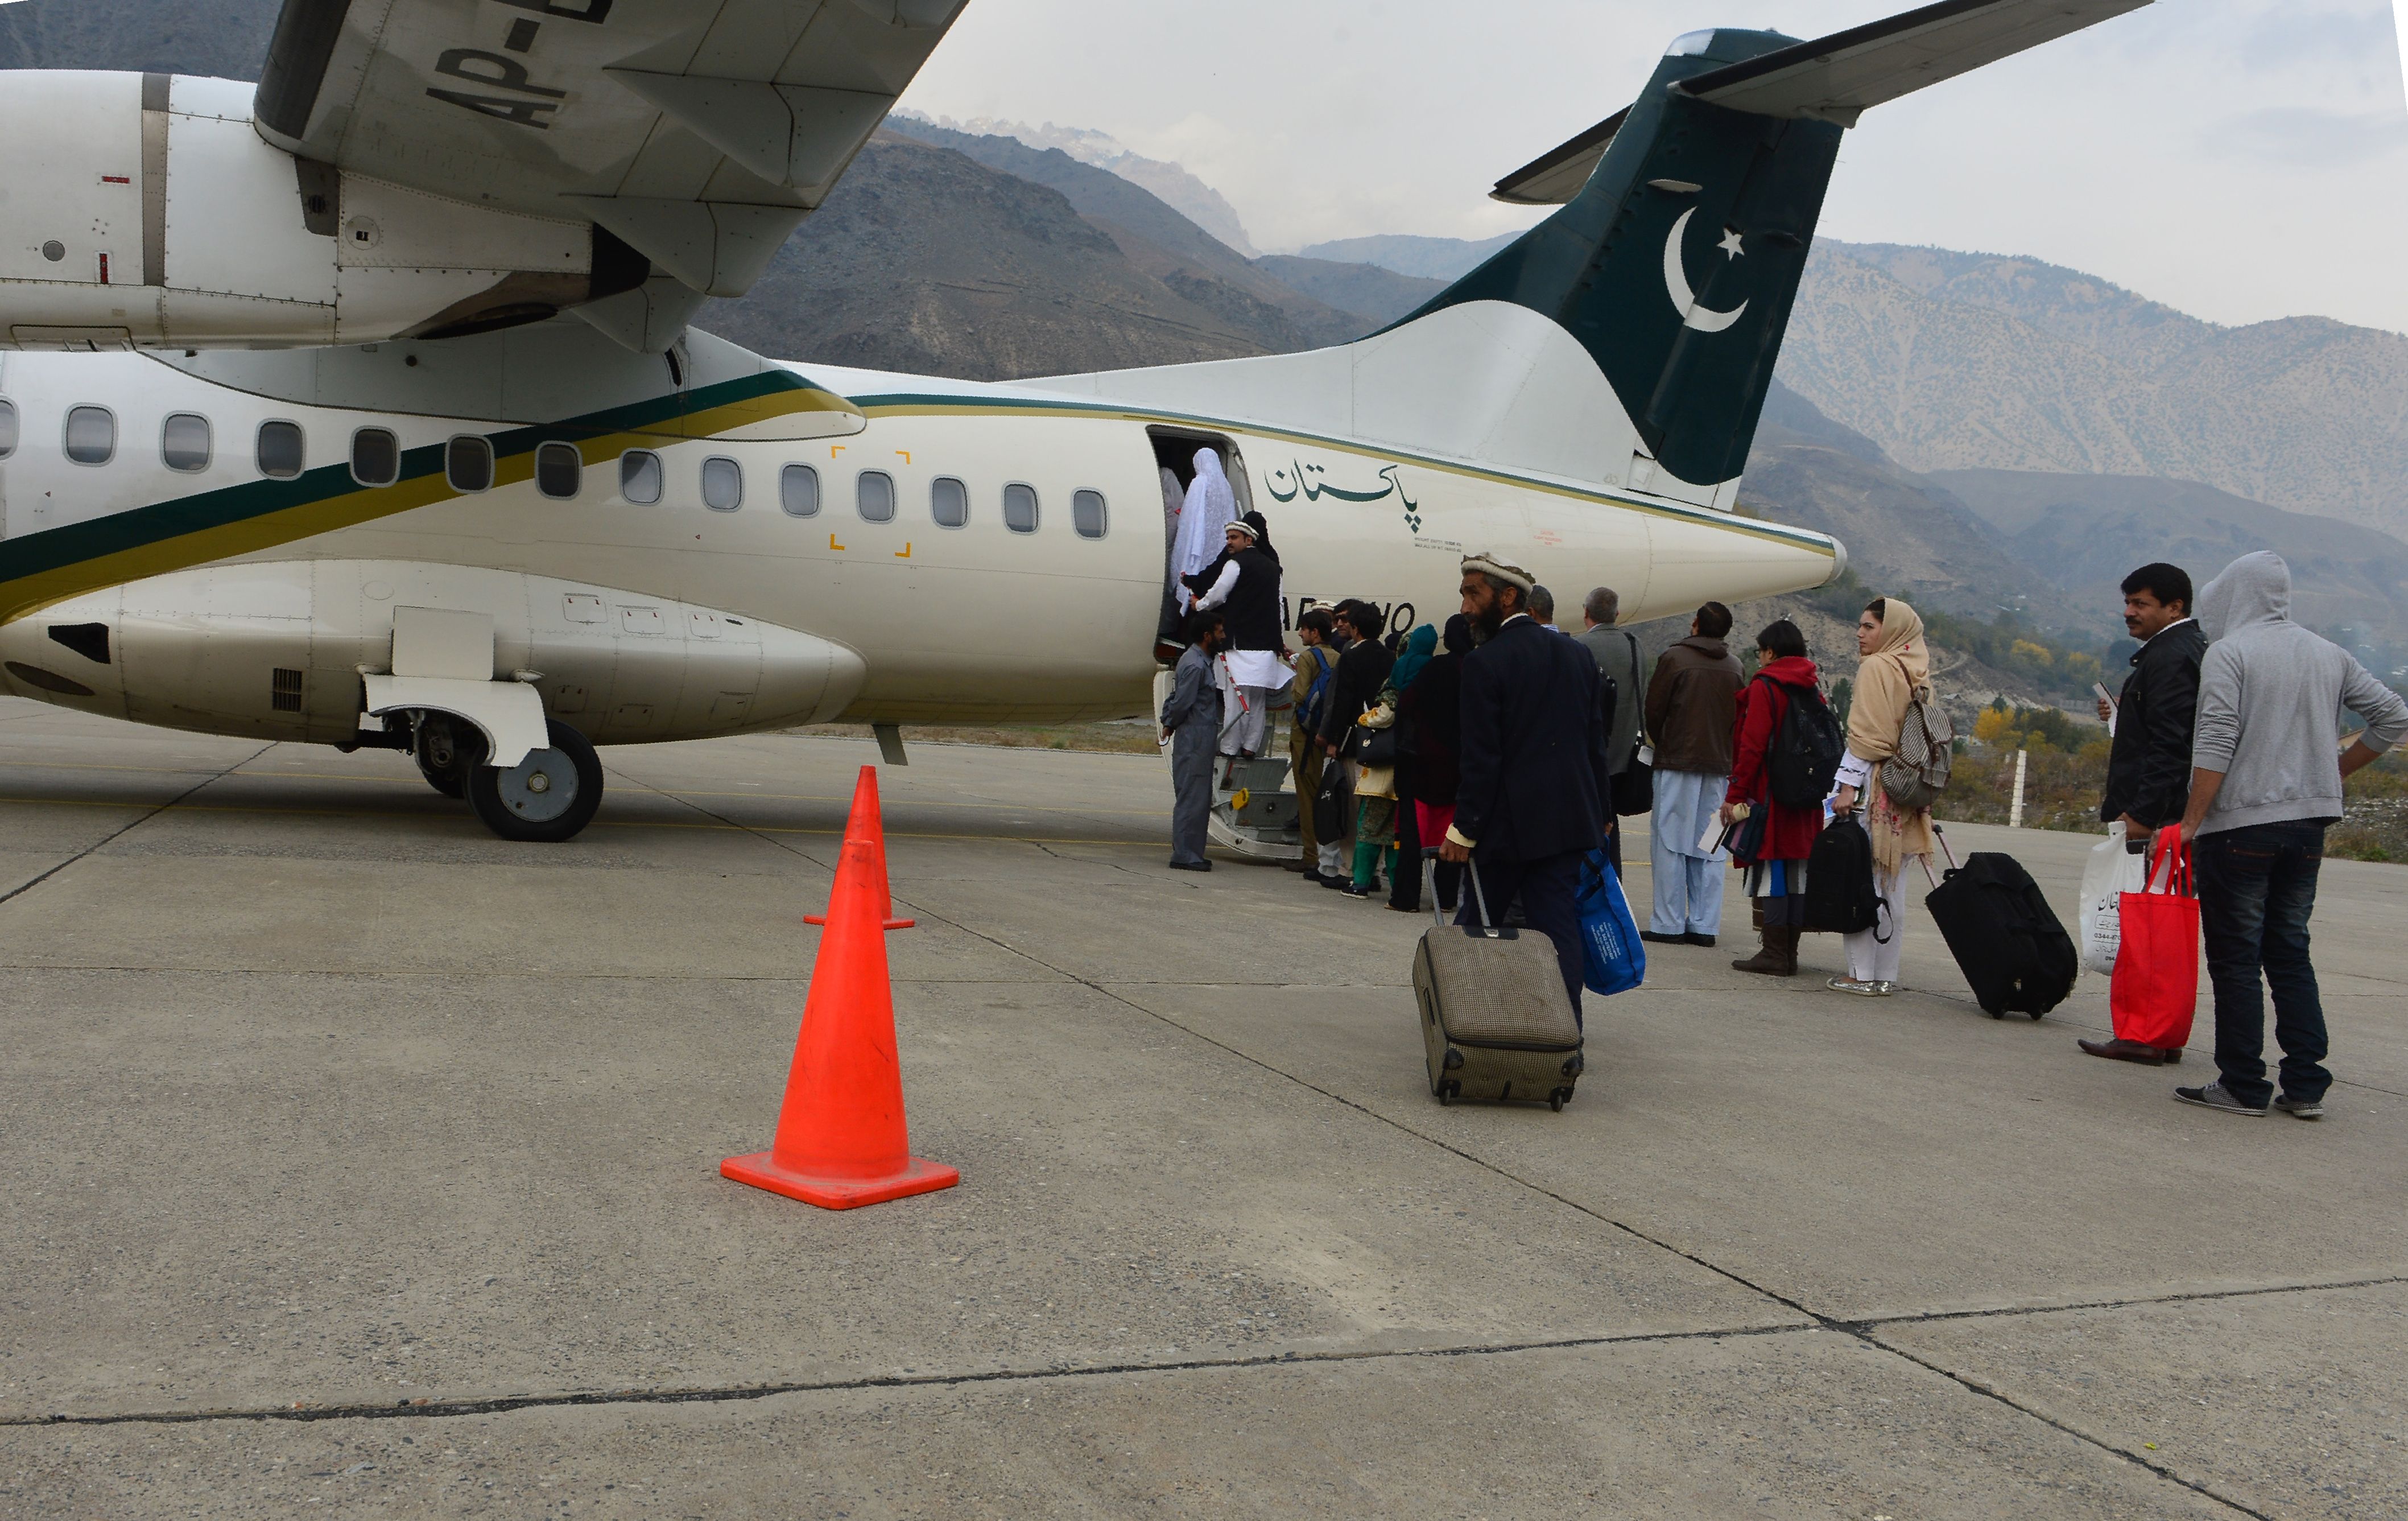 At least 40 dead in plane crash in Pakistan mountains